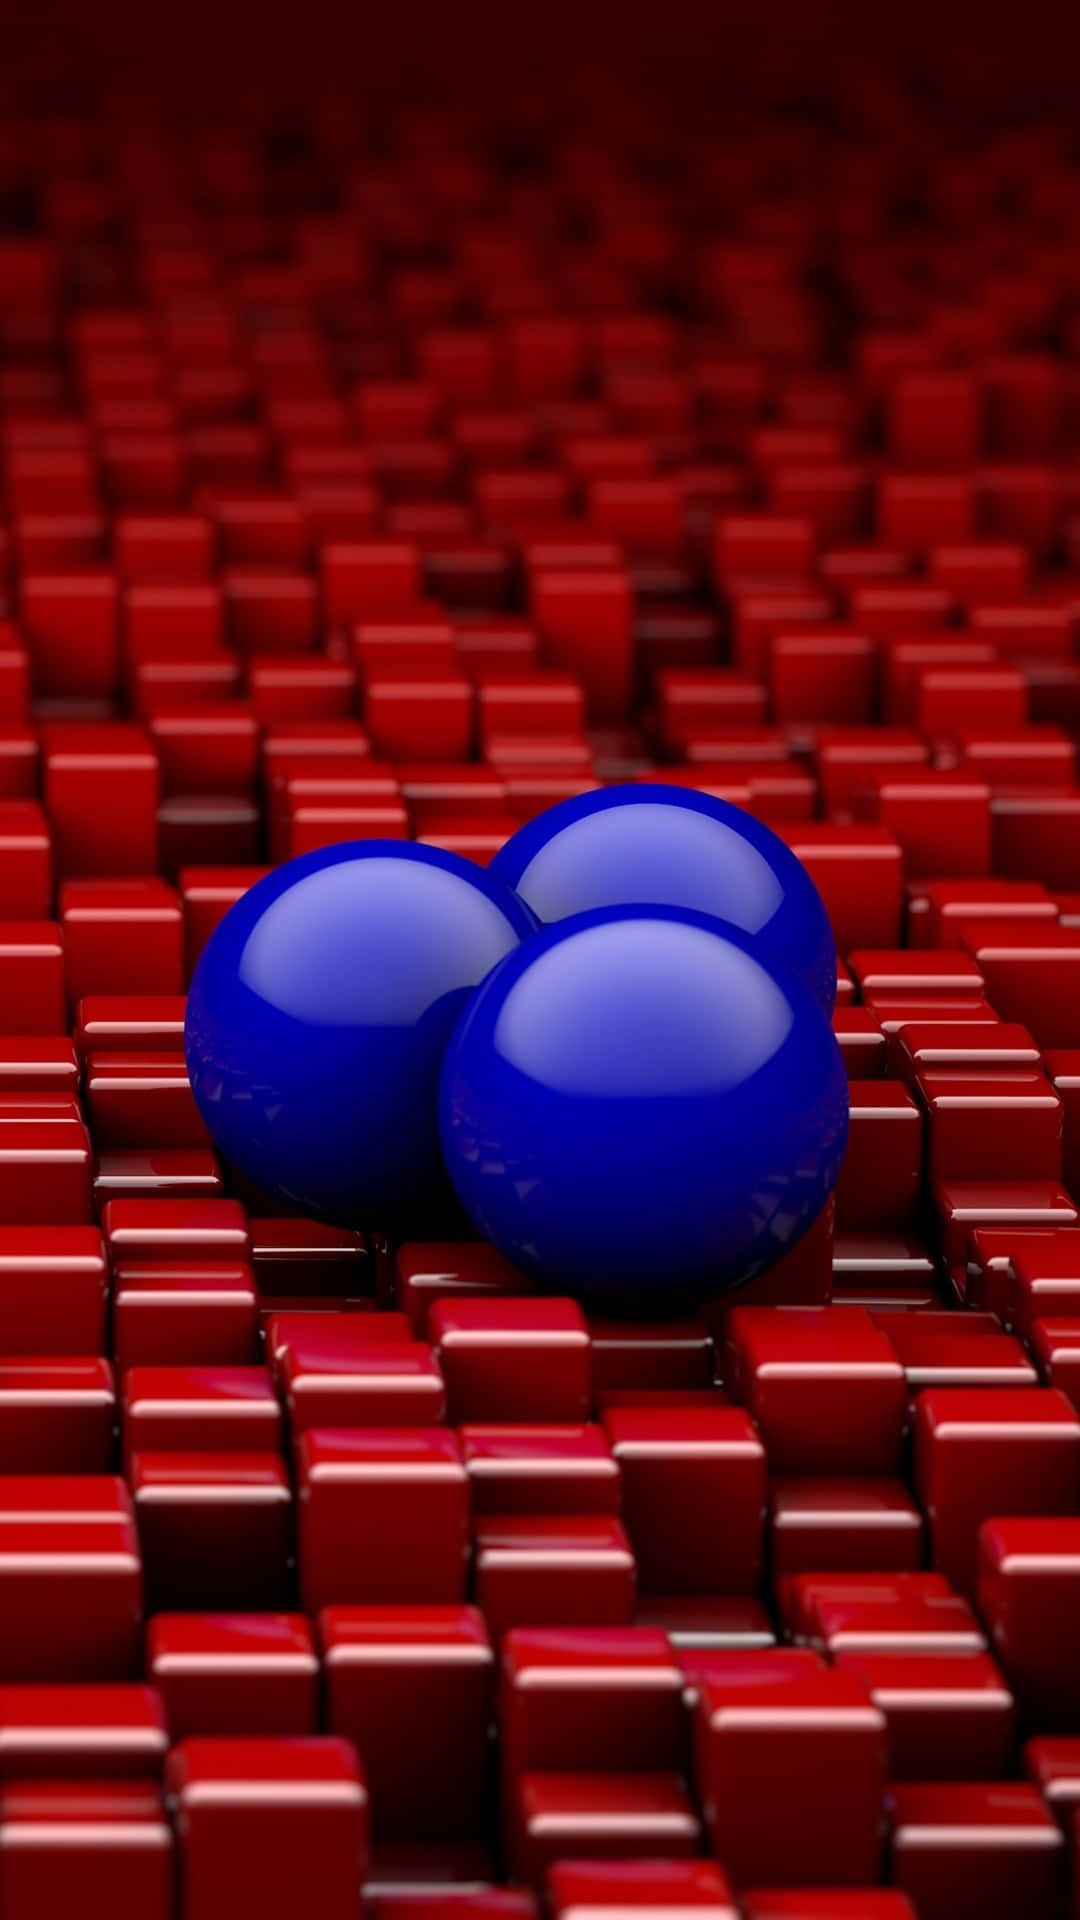 Red And Blue Balls Iphone Wallpaper